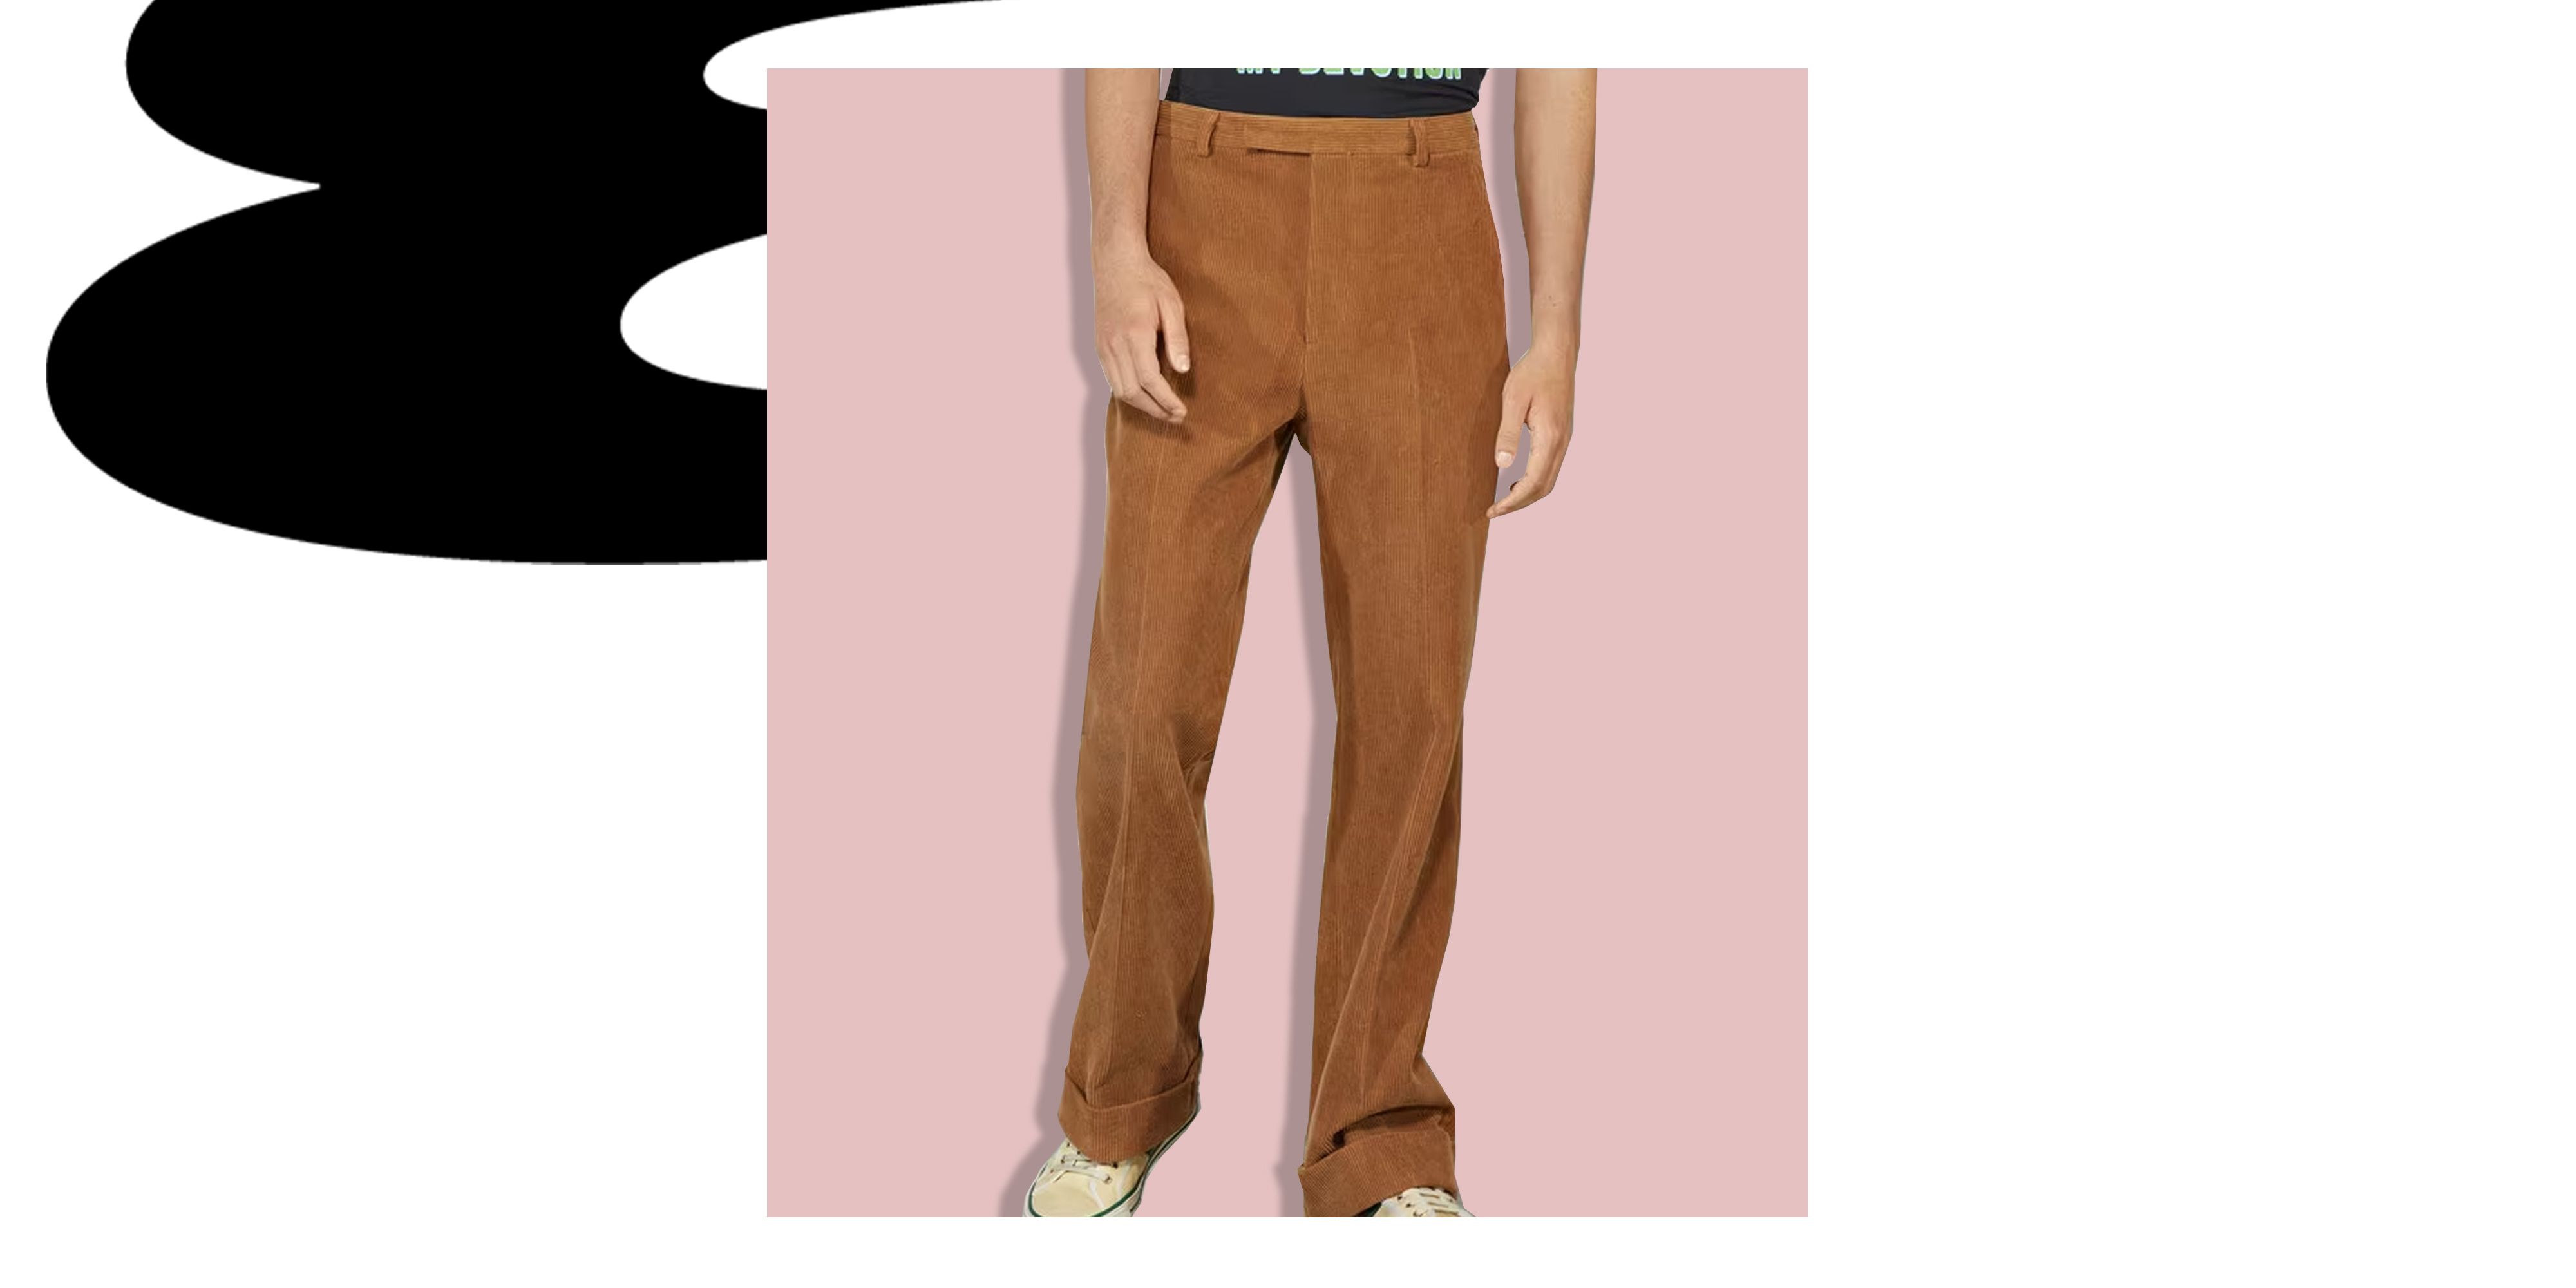 ZFLY Winter Corduroy Pants Women Thick Warm Fashion Elastic High Waist  Pencil Pant Causal Loose Baggy Trousers Color  Brown Size  Medium  price in UAE  Amazon UAE  kanbkam